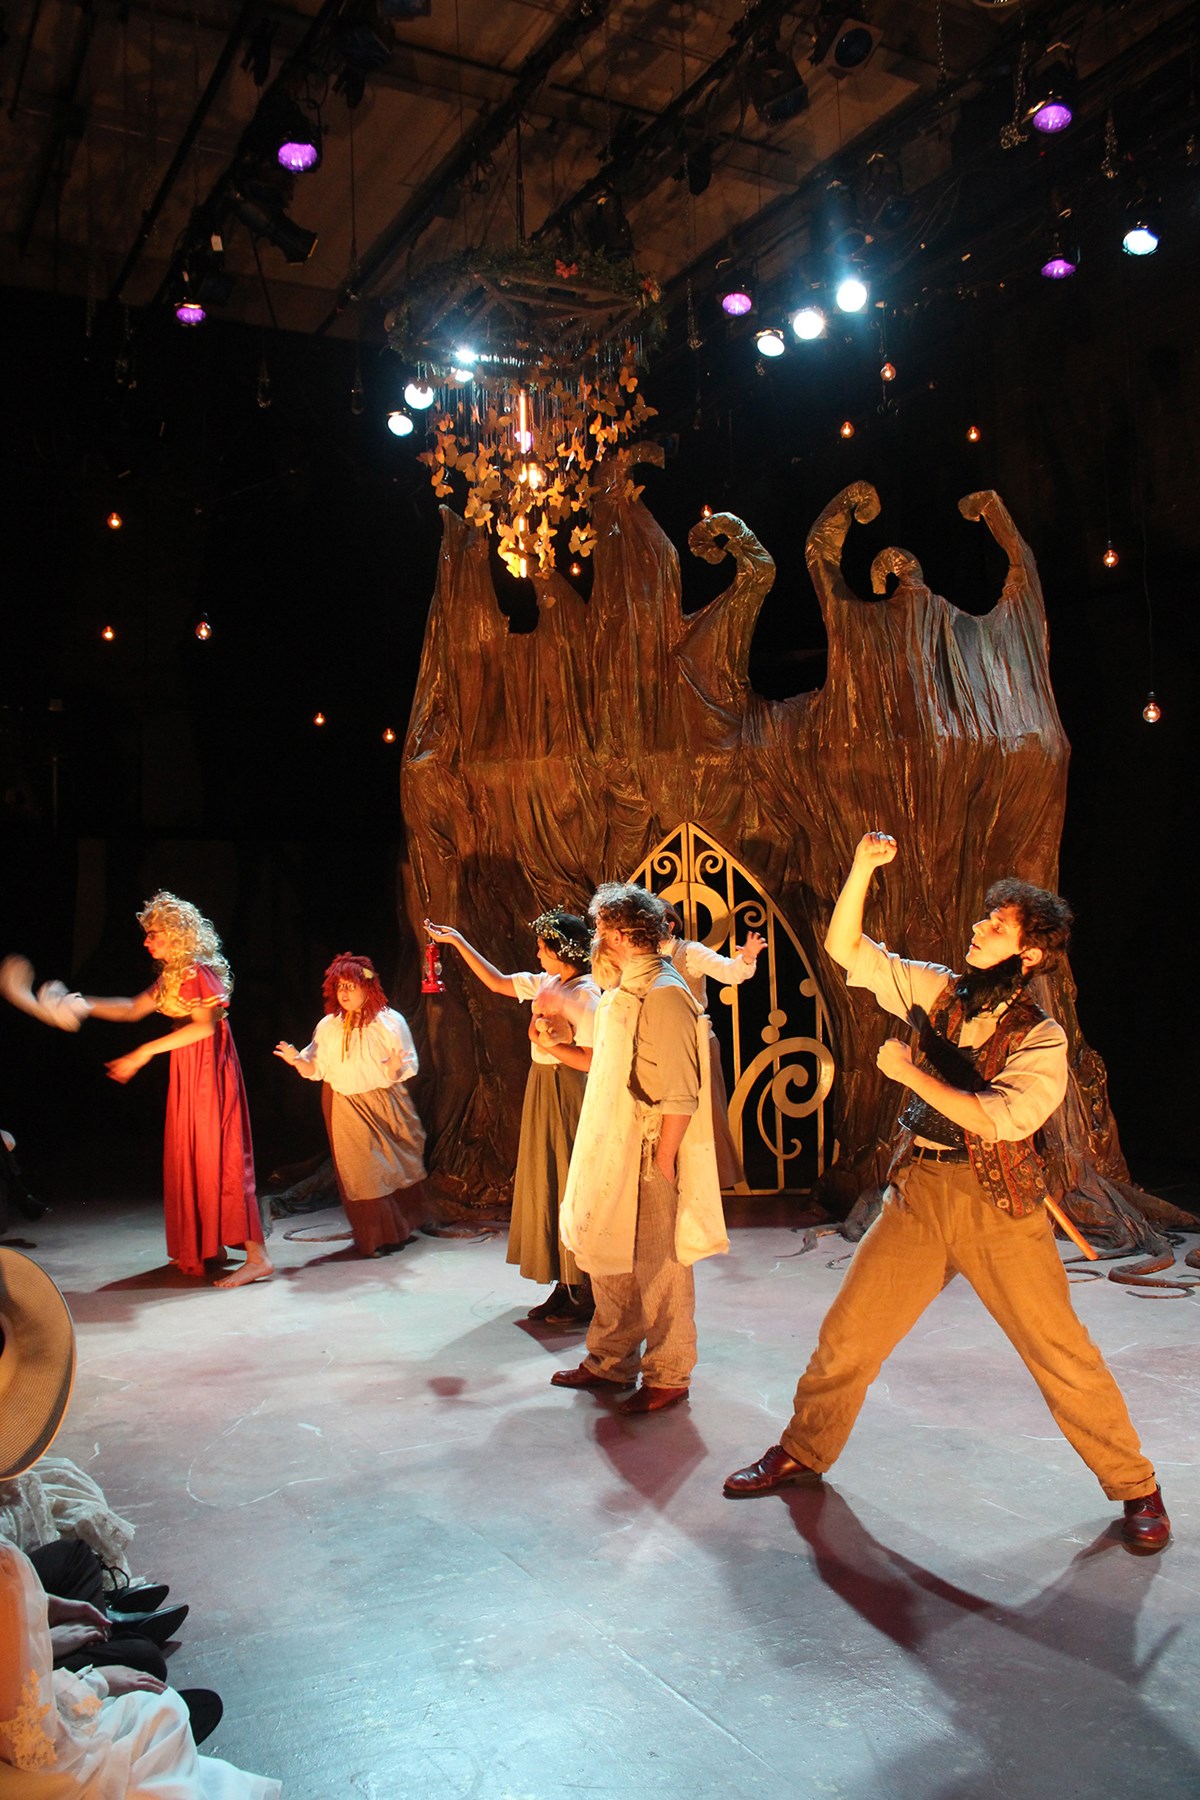 UMass Lowell students perform A Midsummer Night's Dream, the comedy written by William Shakespeare in 1595/96.